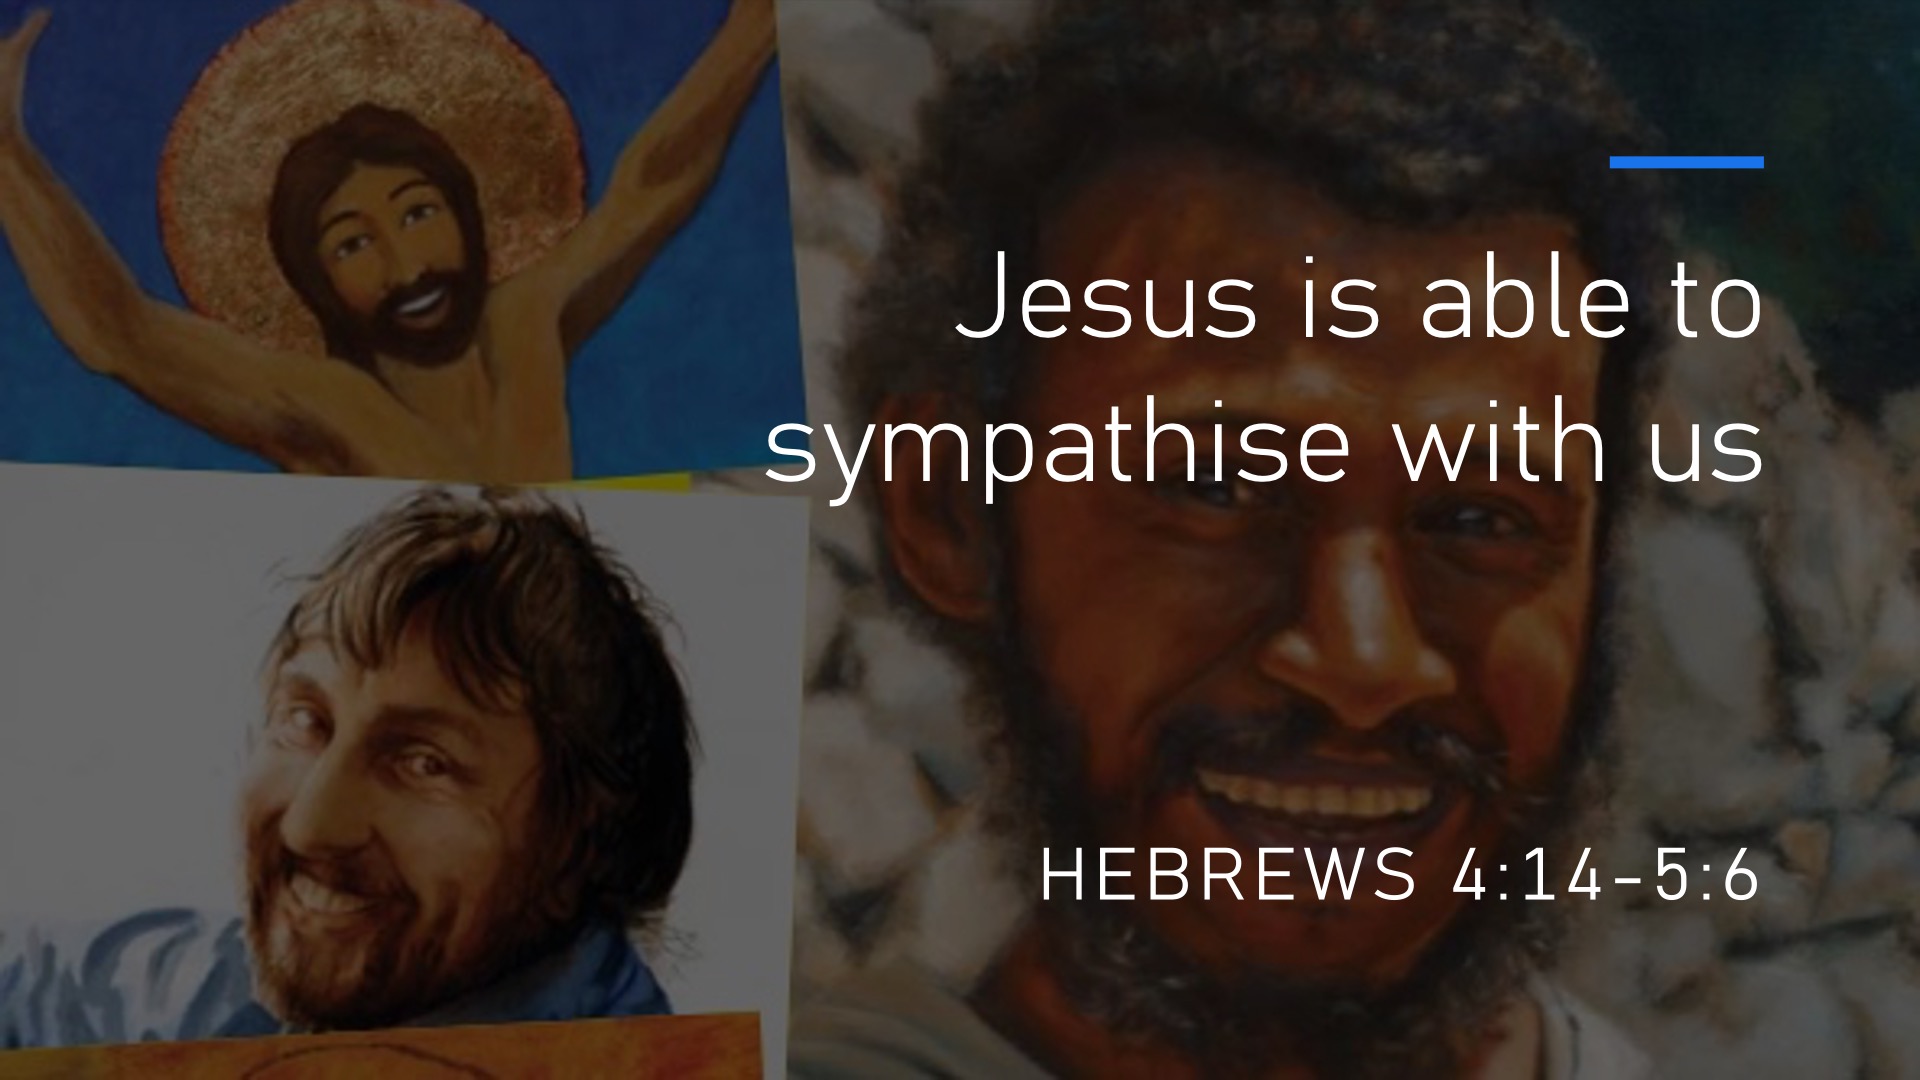 Jesus is able to sympathise with us